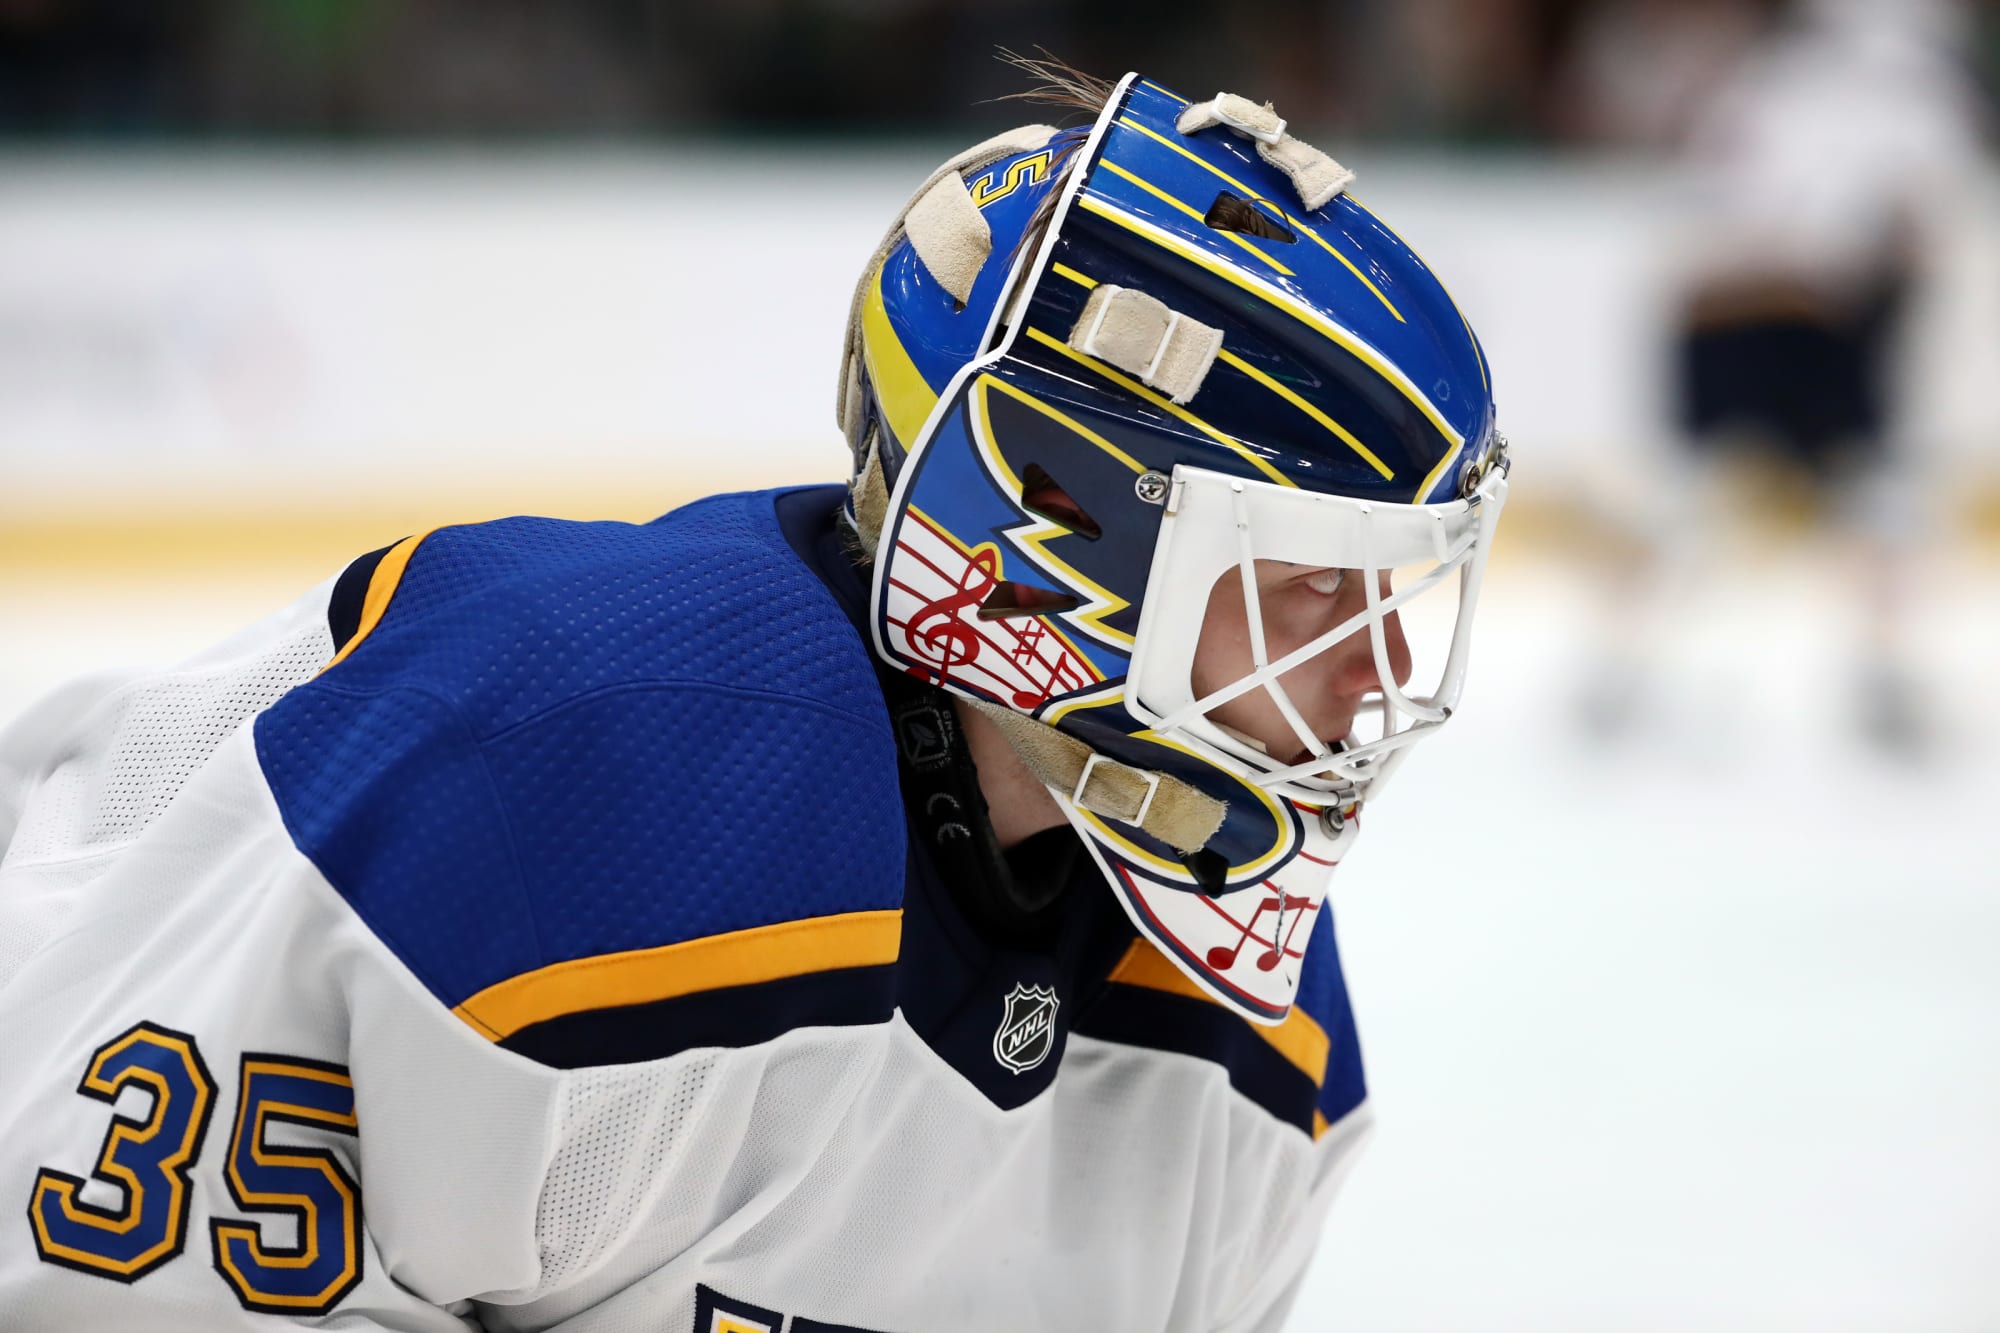 Wall Mask - New Wall W10 mask for Ville Husso, St.Louis Blues. Guy